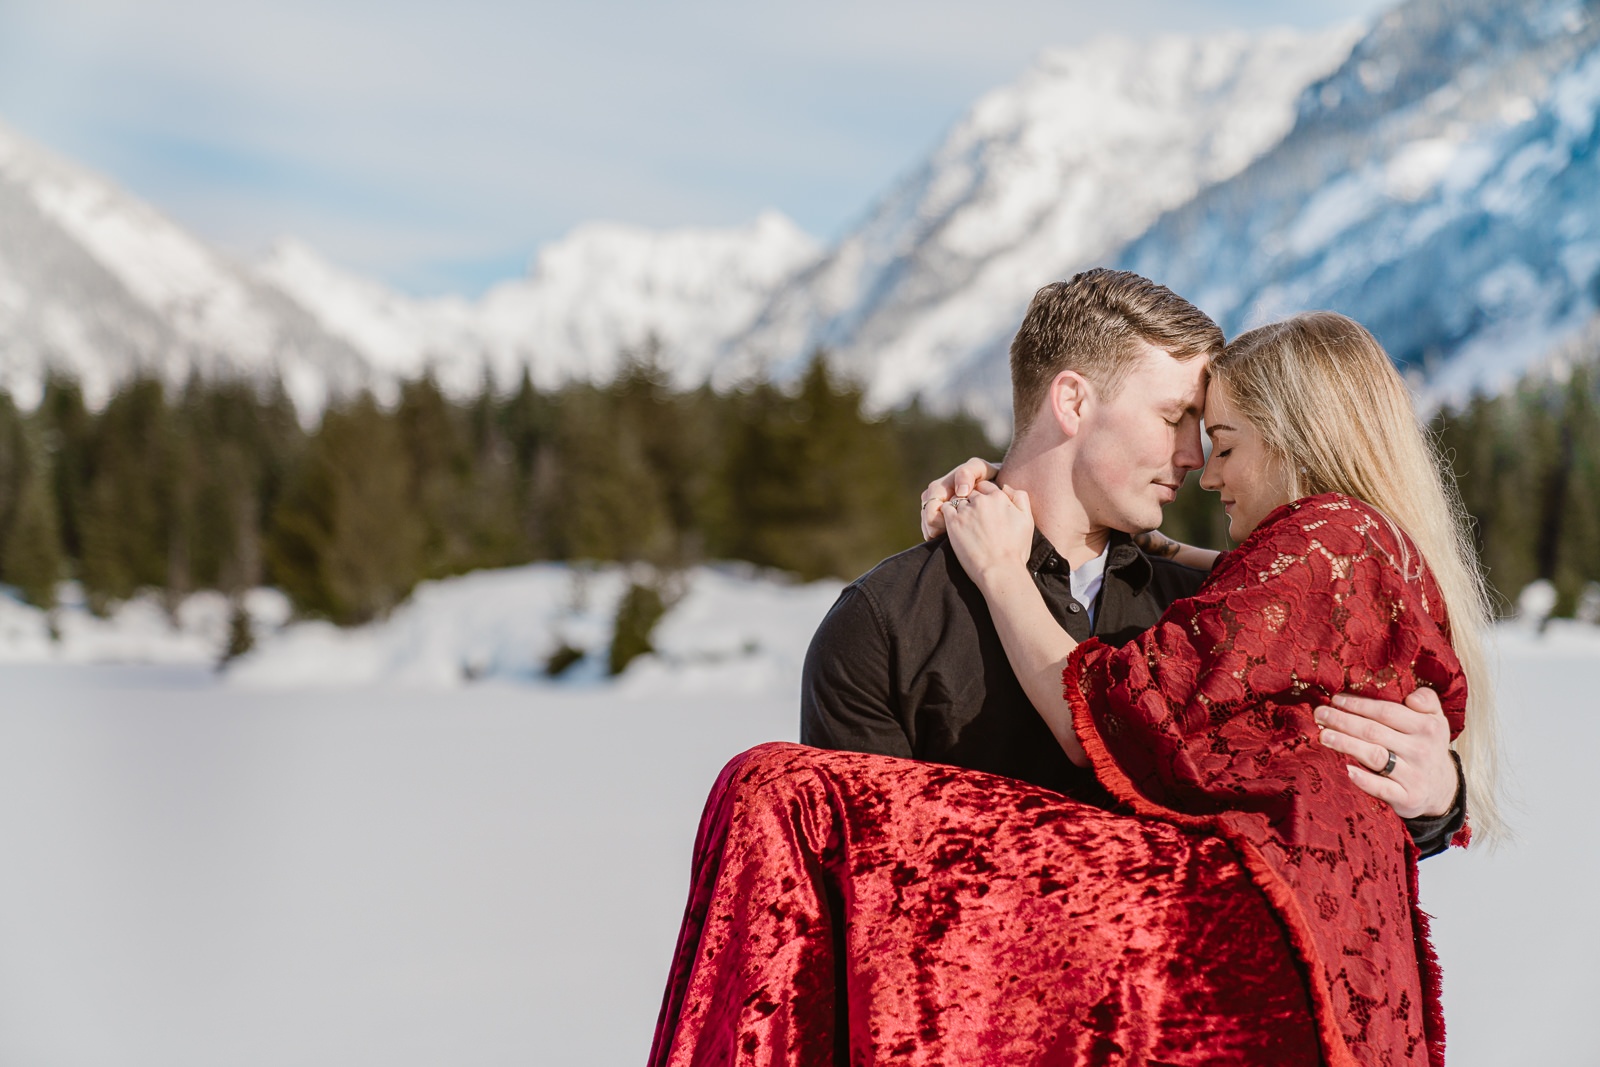 Husband holds wife in his arms at a snow covered alpine lake with mountains in the background